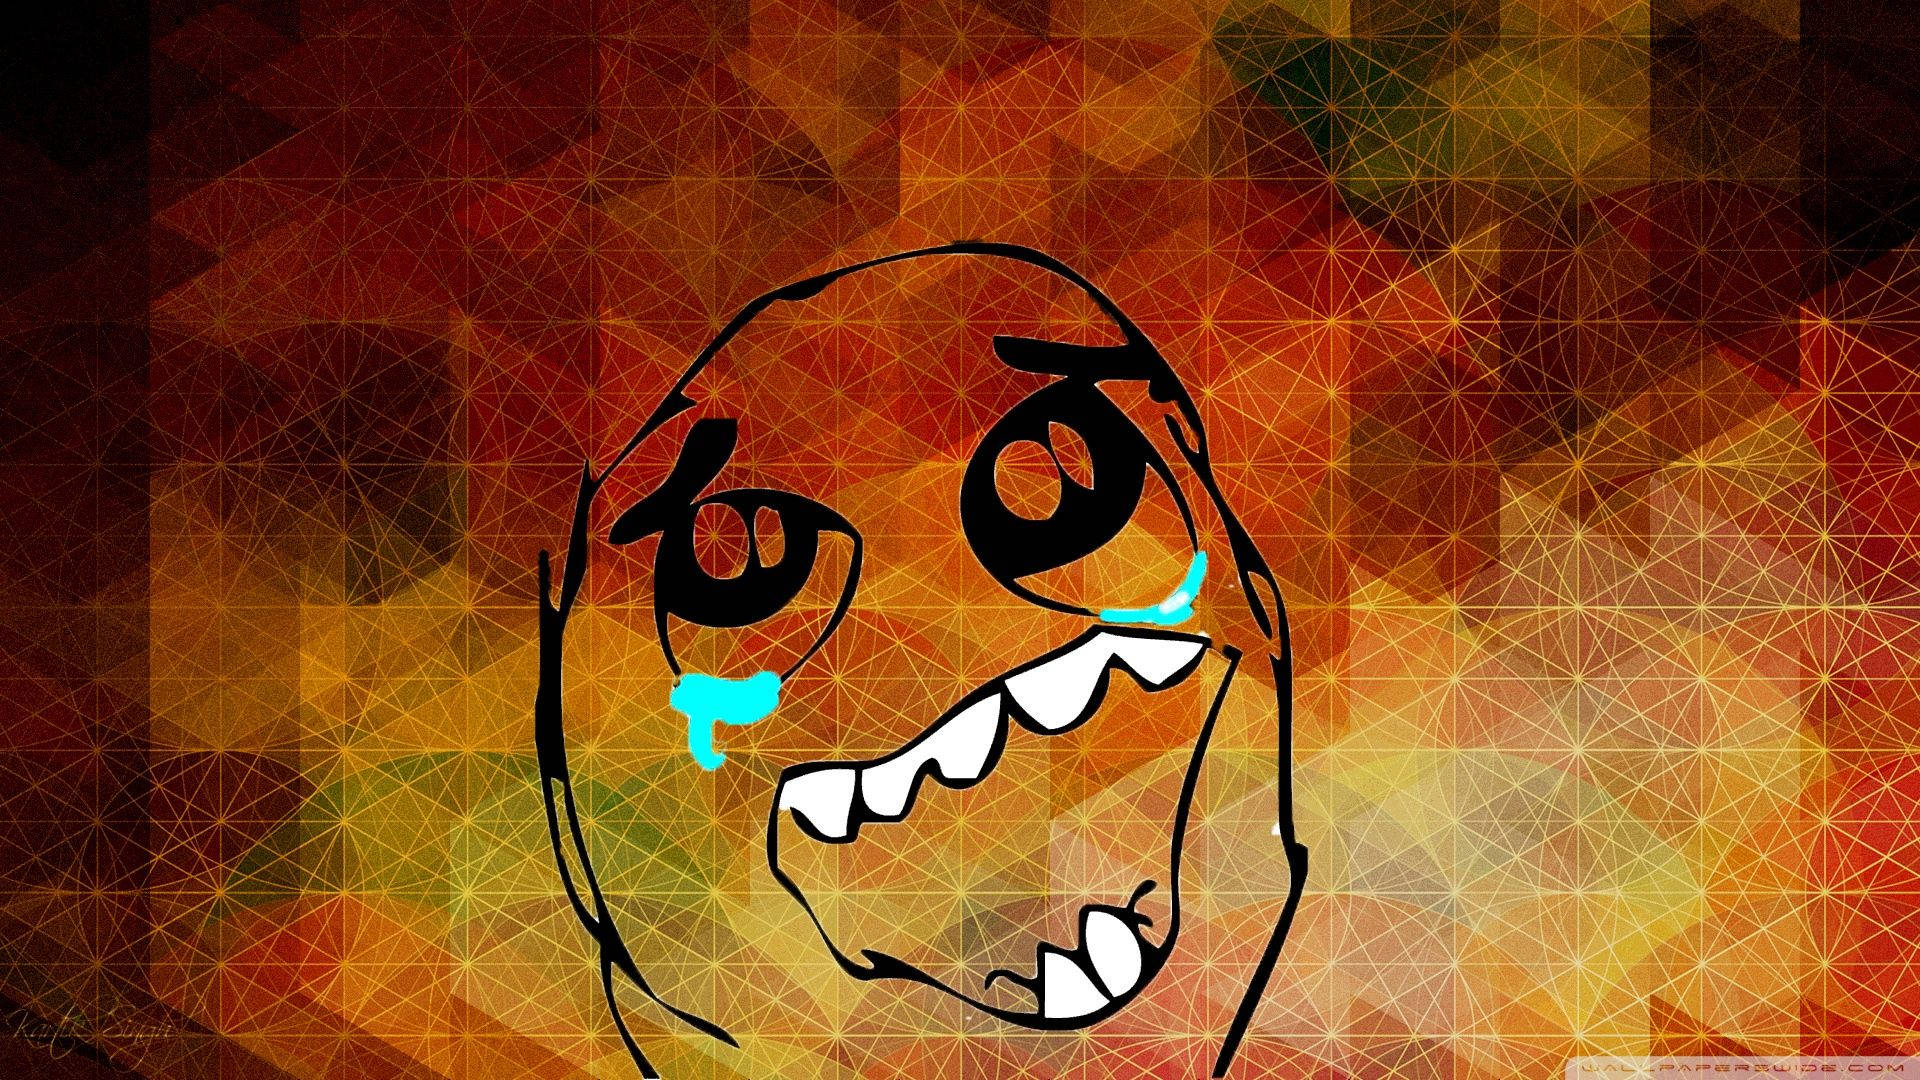 Crying rage meme on an abstract orange modern background.